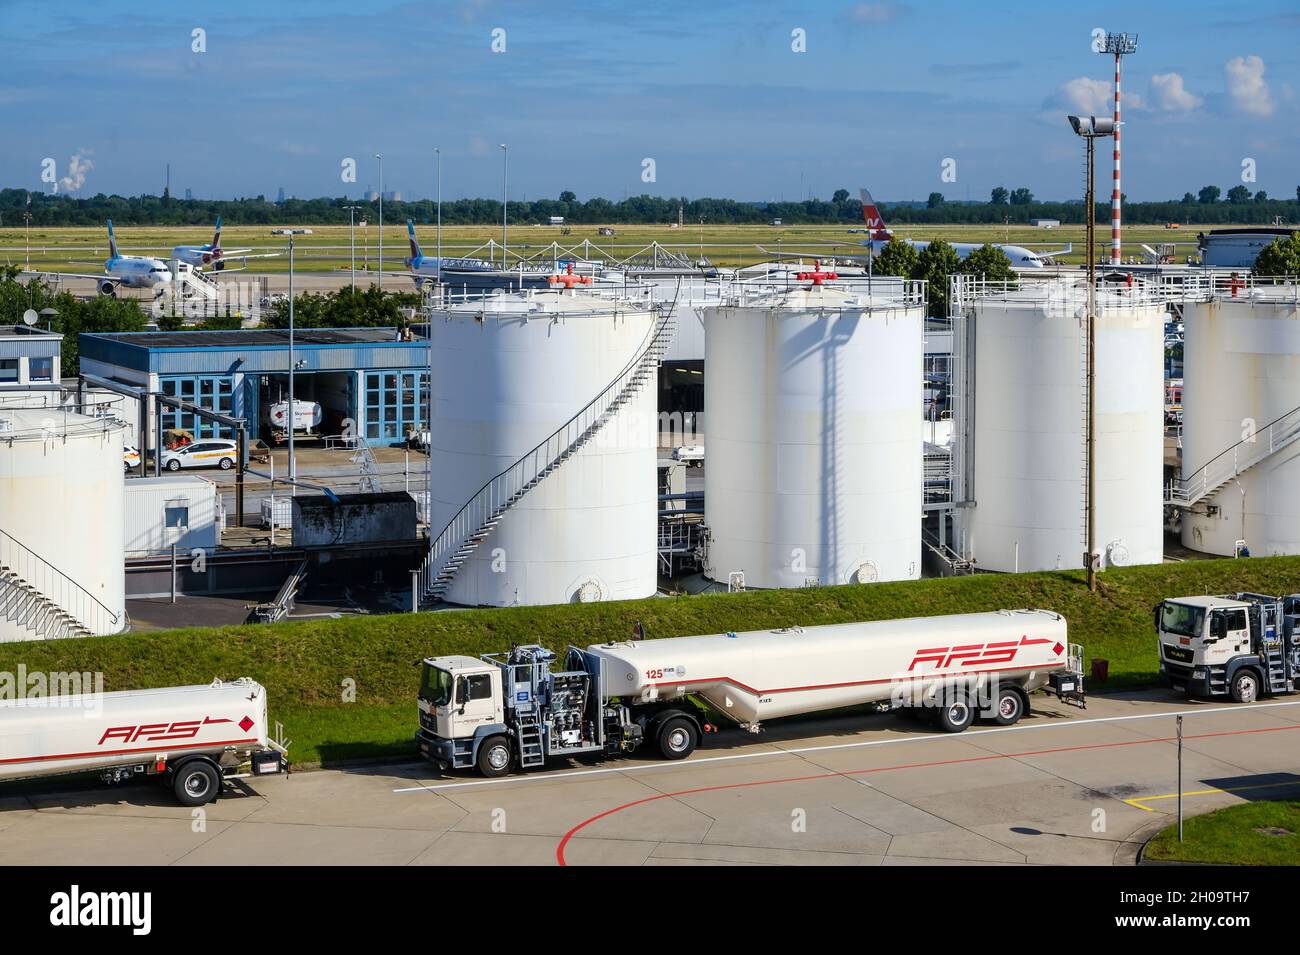 '02.07.2021, Germany, North Rhine-Westphalia, Duesseldorf - Aviation fuel storage tanks at Duesseldorf Airport, aircraft refueling and aviation fuel s Stock Photo